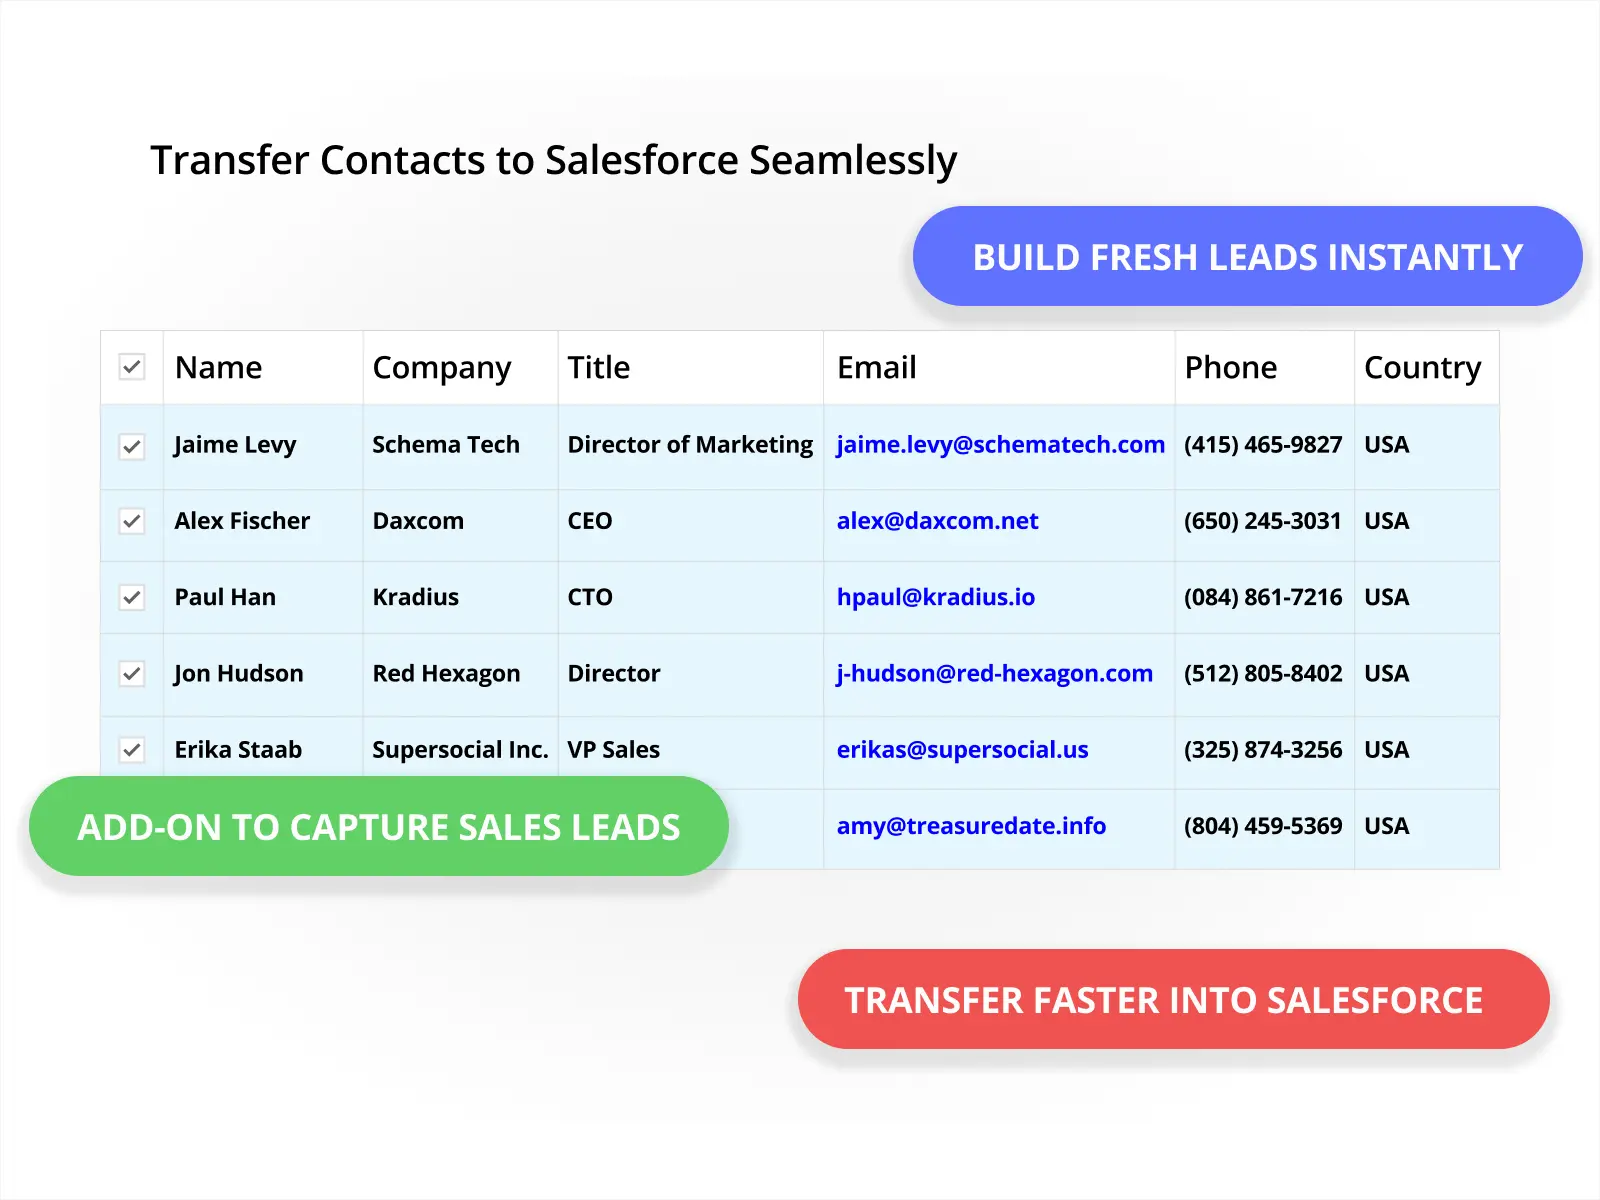 Transfer contacts to salesforce seamlessly